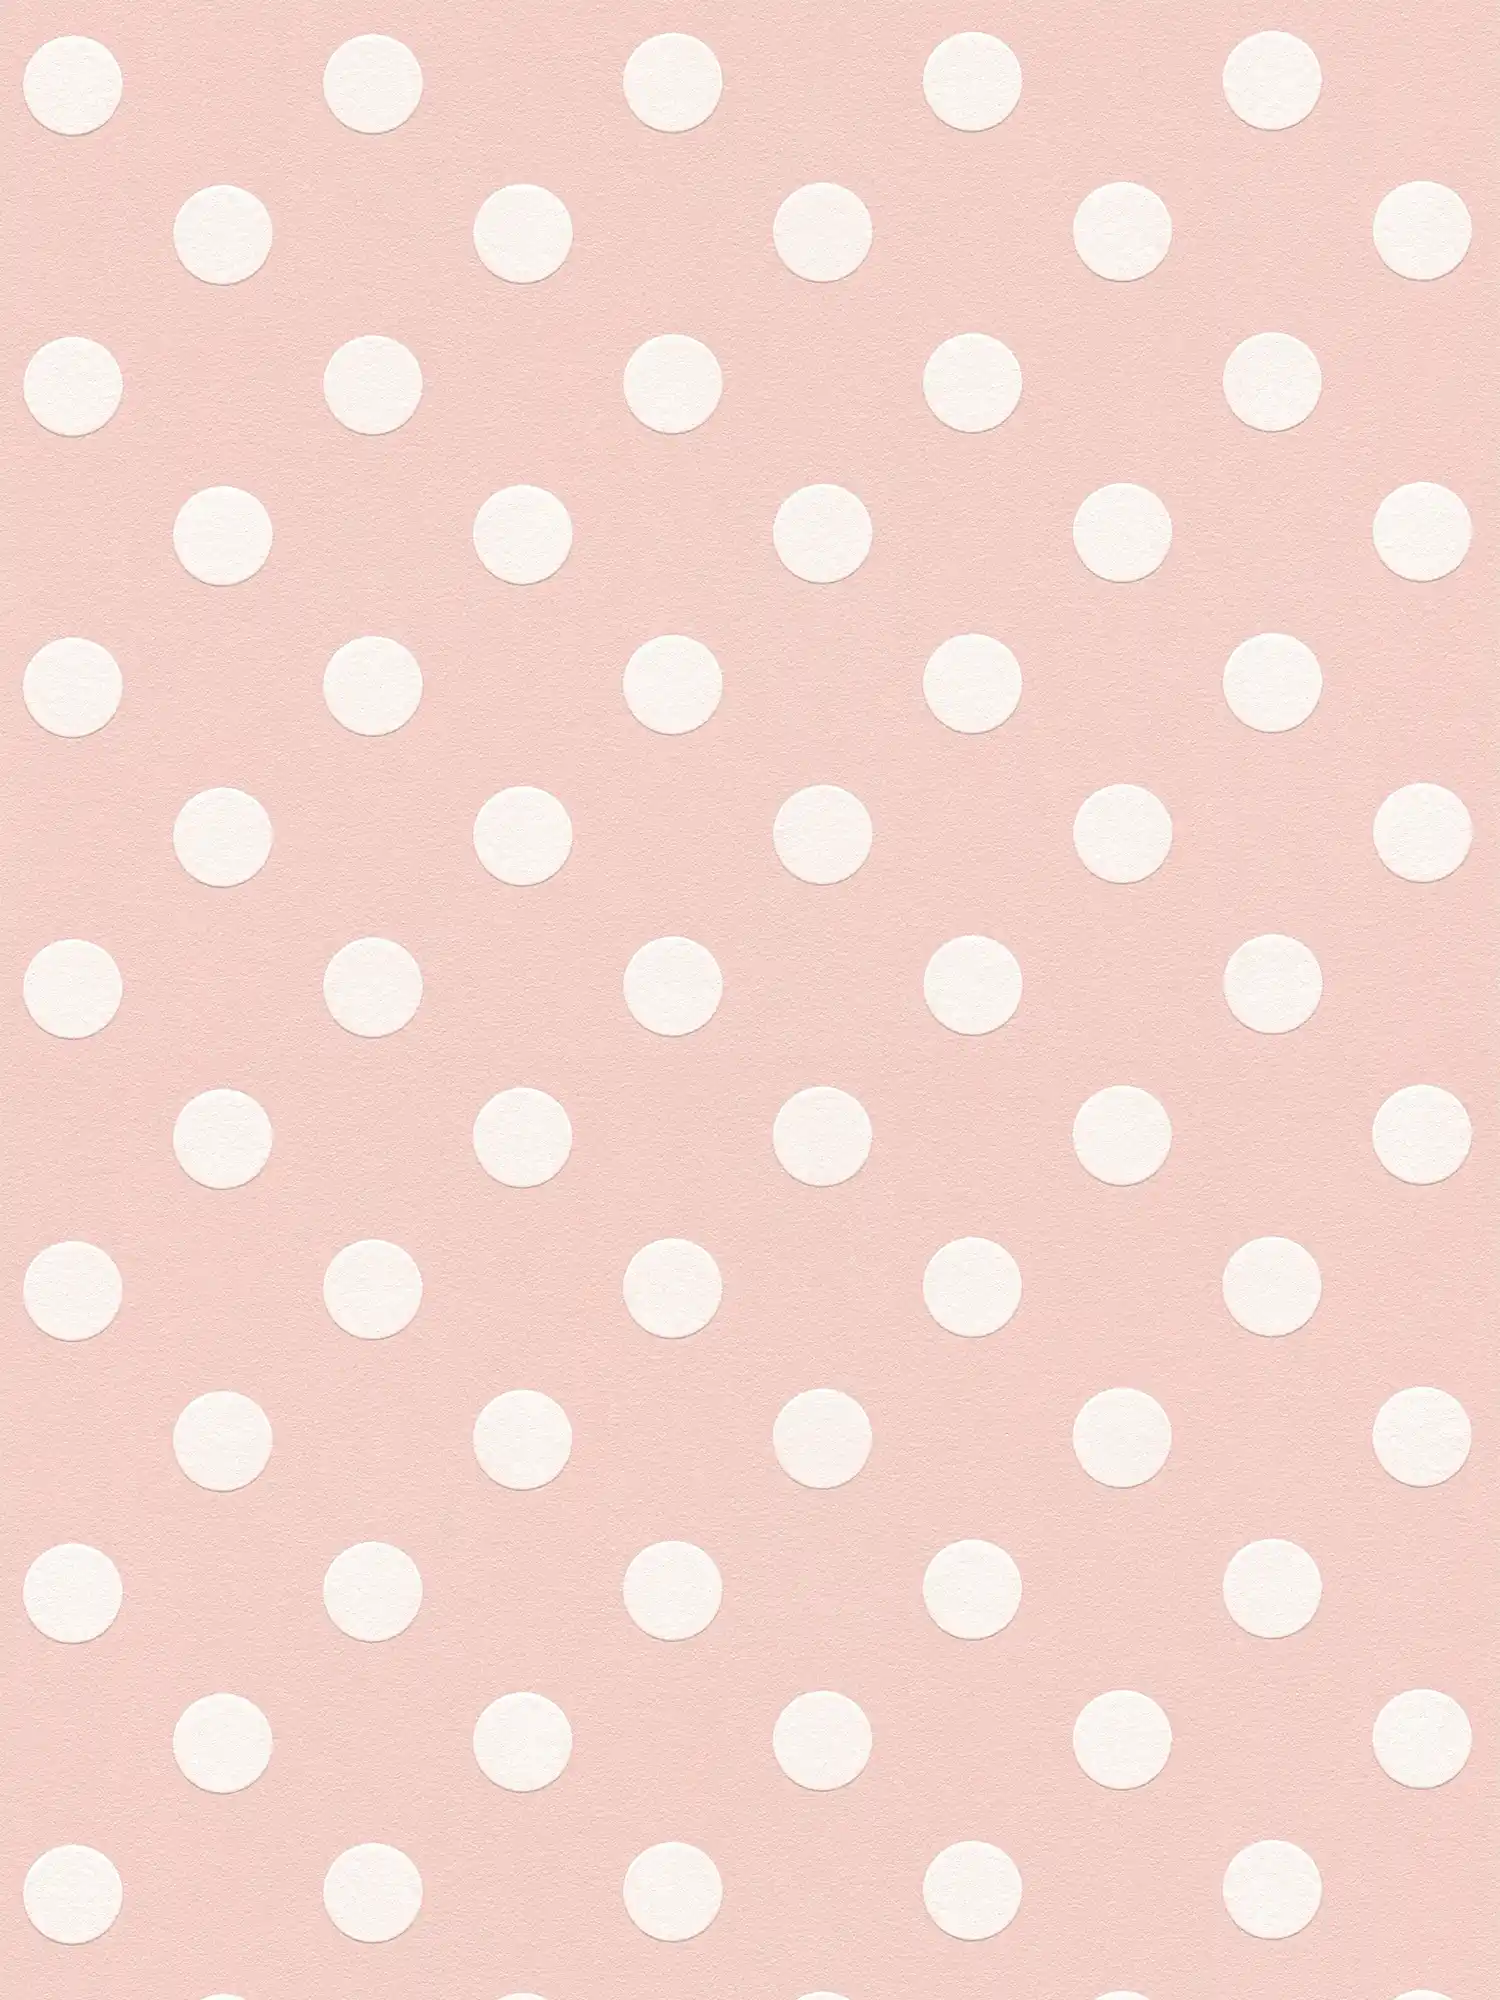 Pink dots wallpaper, polka dots for girls room - pink, white
